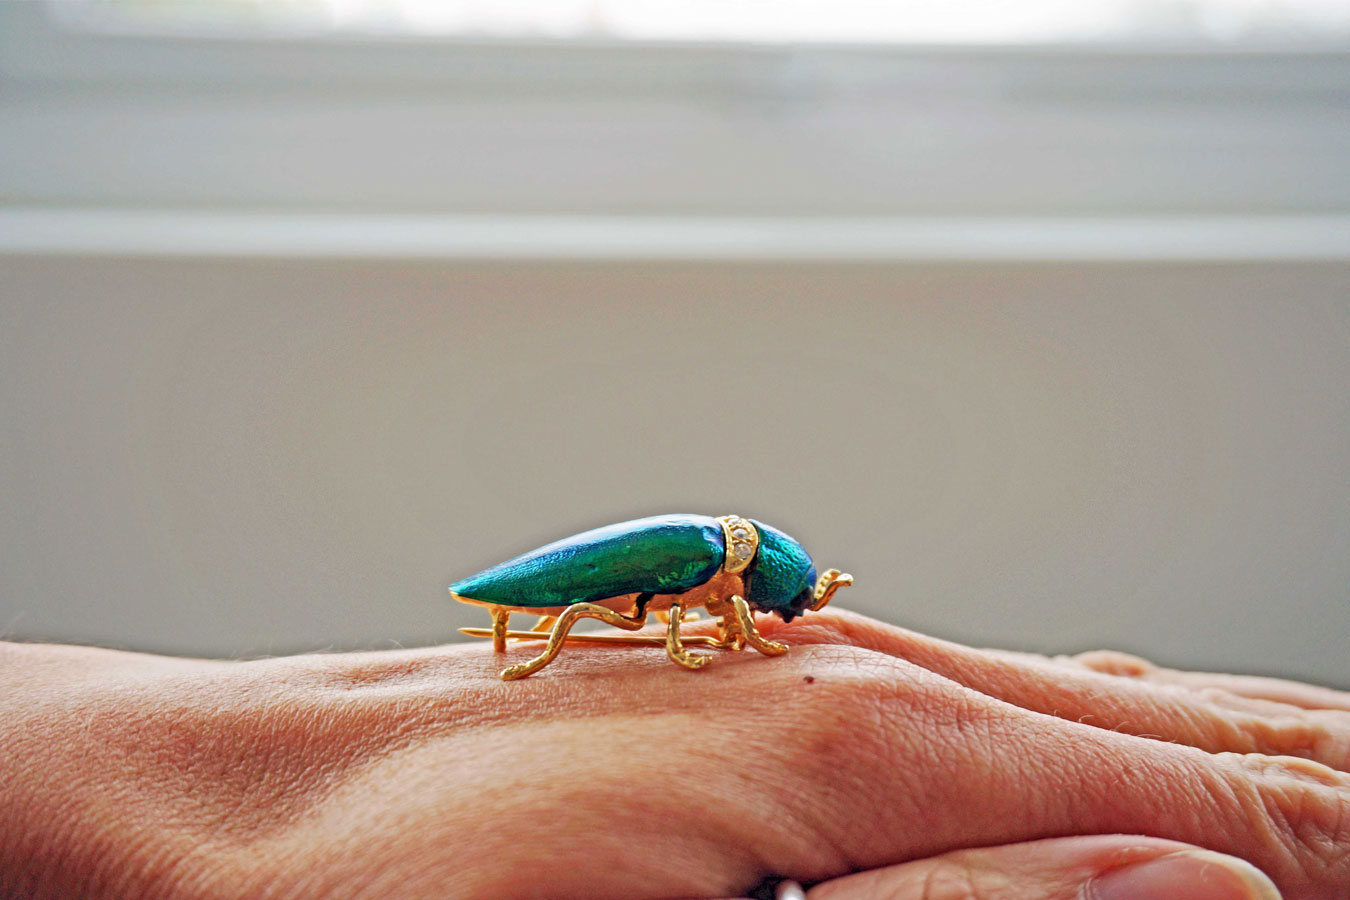 Vintage Iridescent Green Scarab Beetle Brooch, Green Beetle Pin Brooch Gift For Her - Ada's Attic Vintage- 1